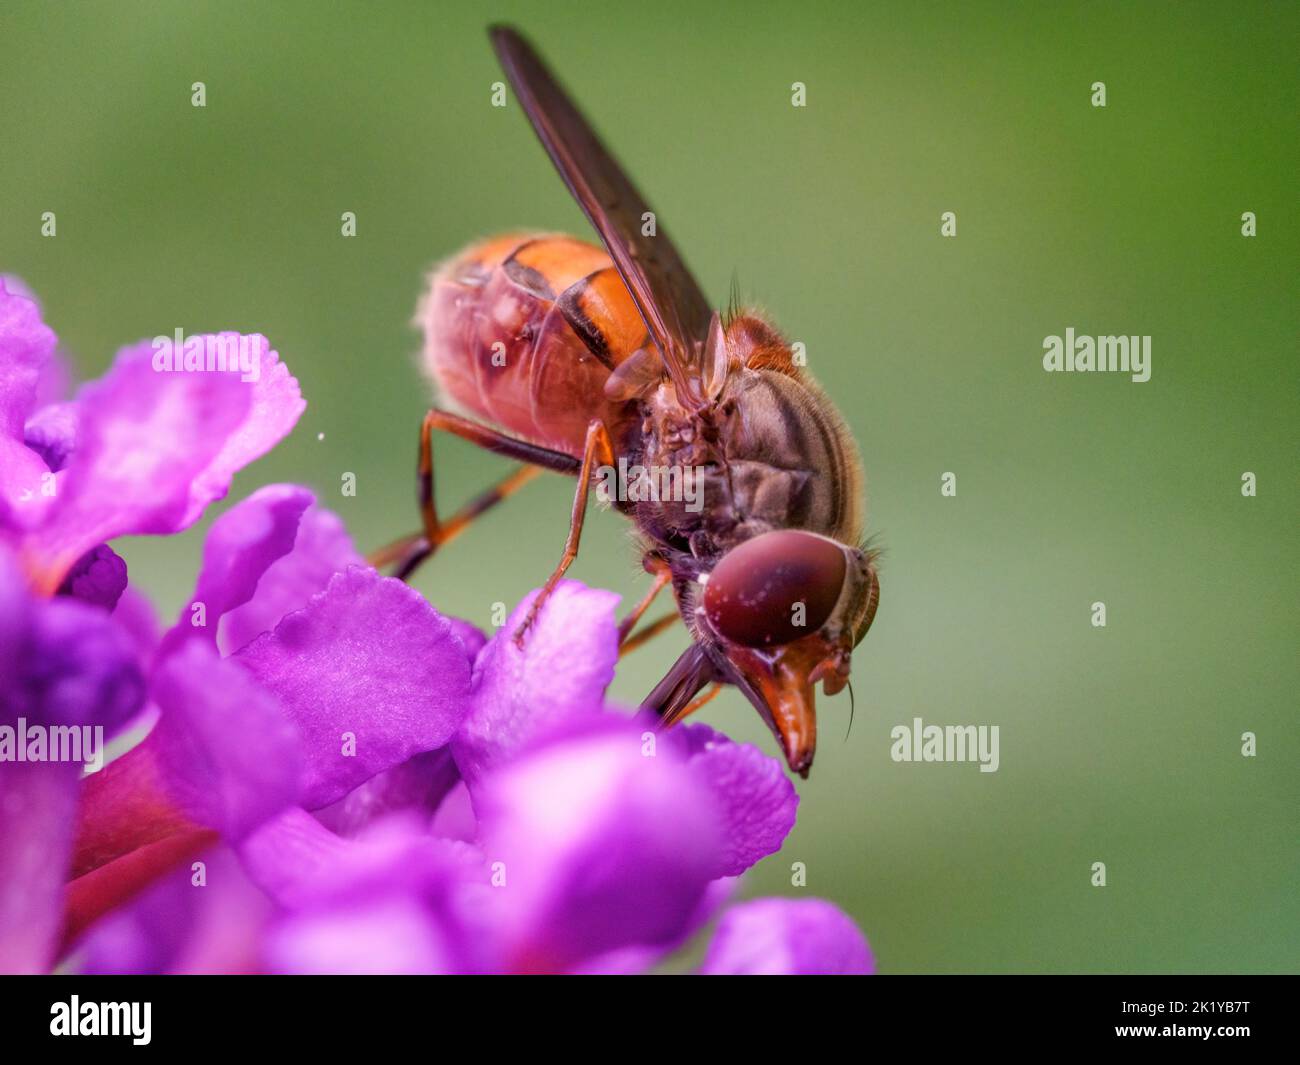 Female Rhingia campestris hoverfly on a buddleia flower against a clean green bachground with space for copy Stock Photo